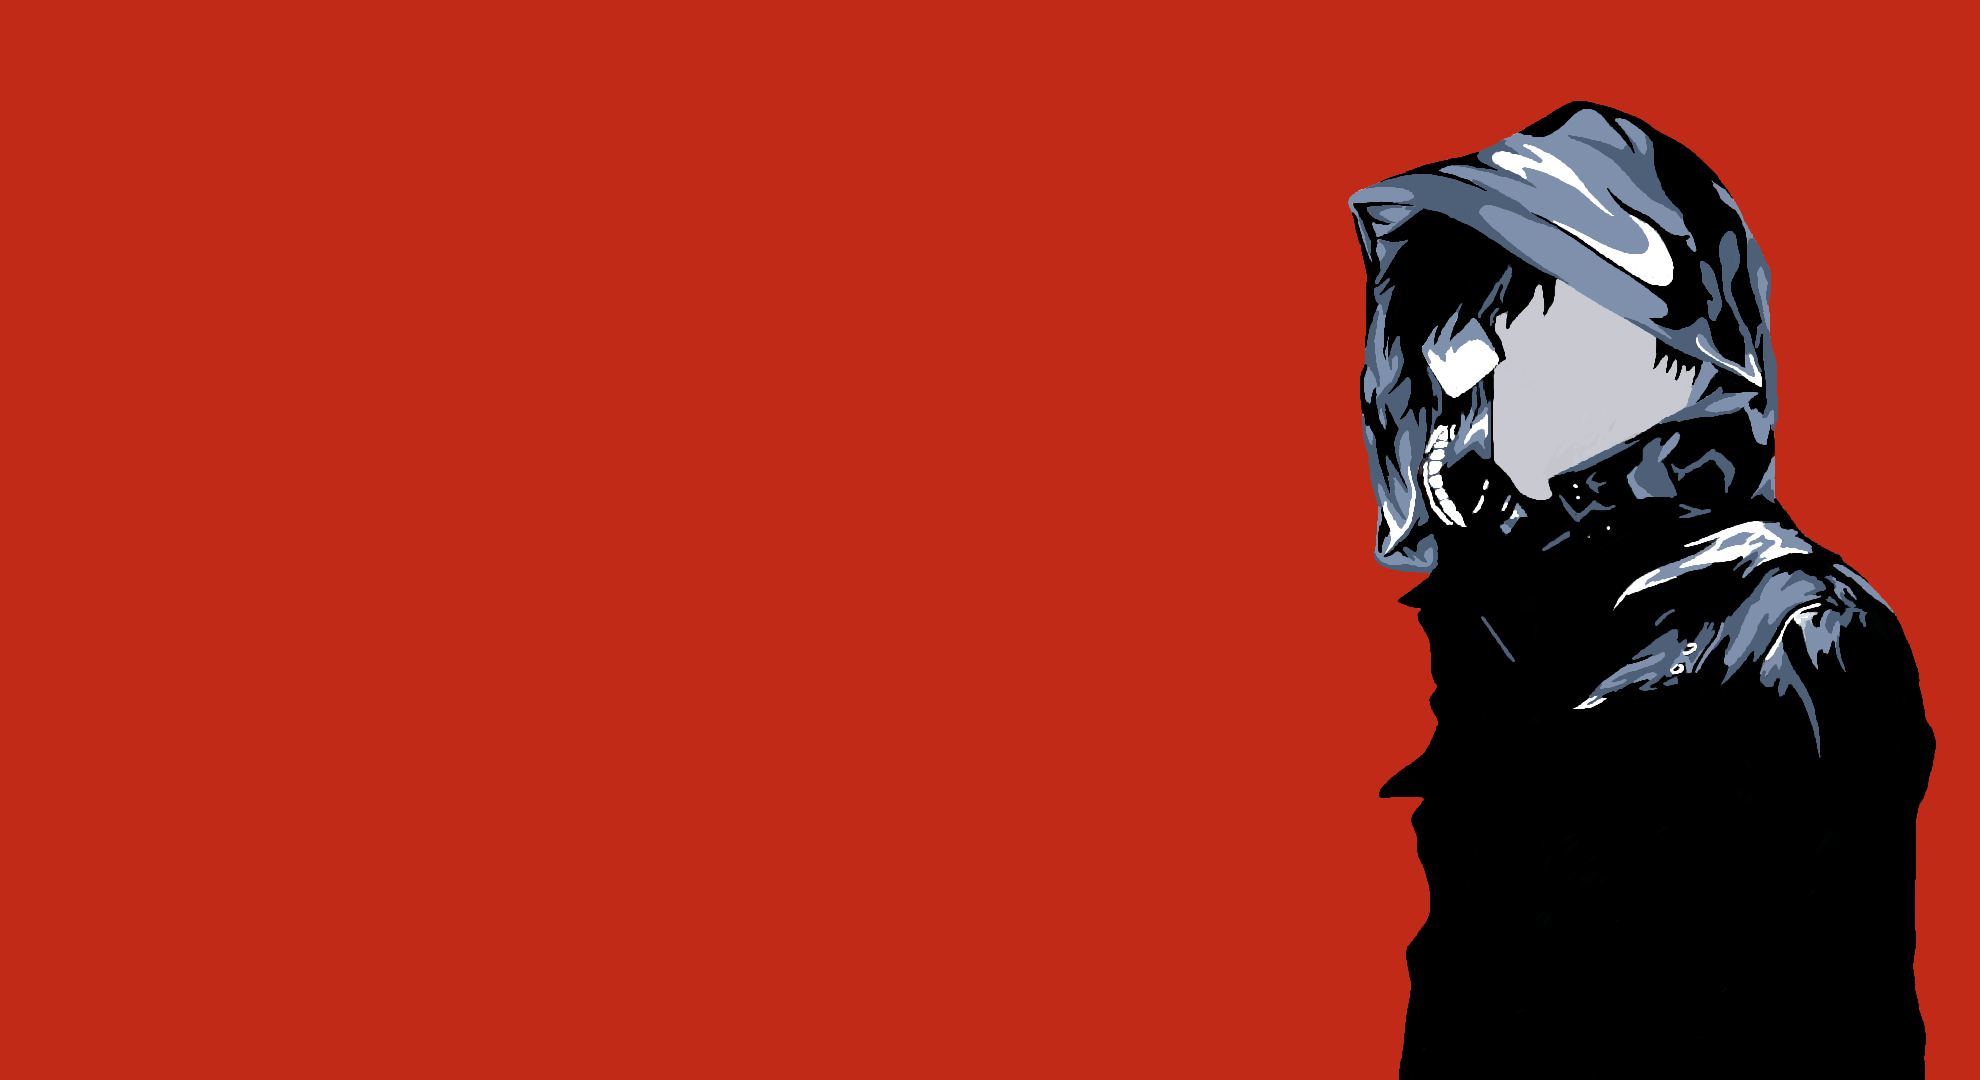 tokyo ghoul wallpaper,red,supervillain,fictional character,carmine,darth vader